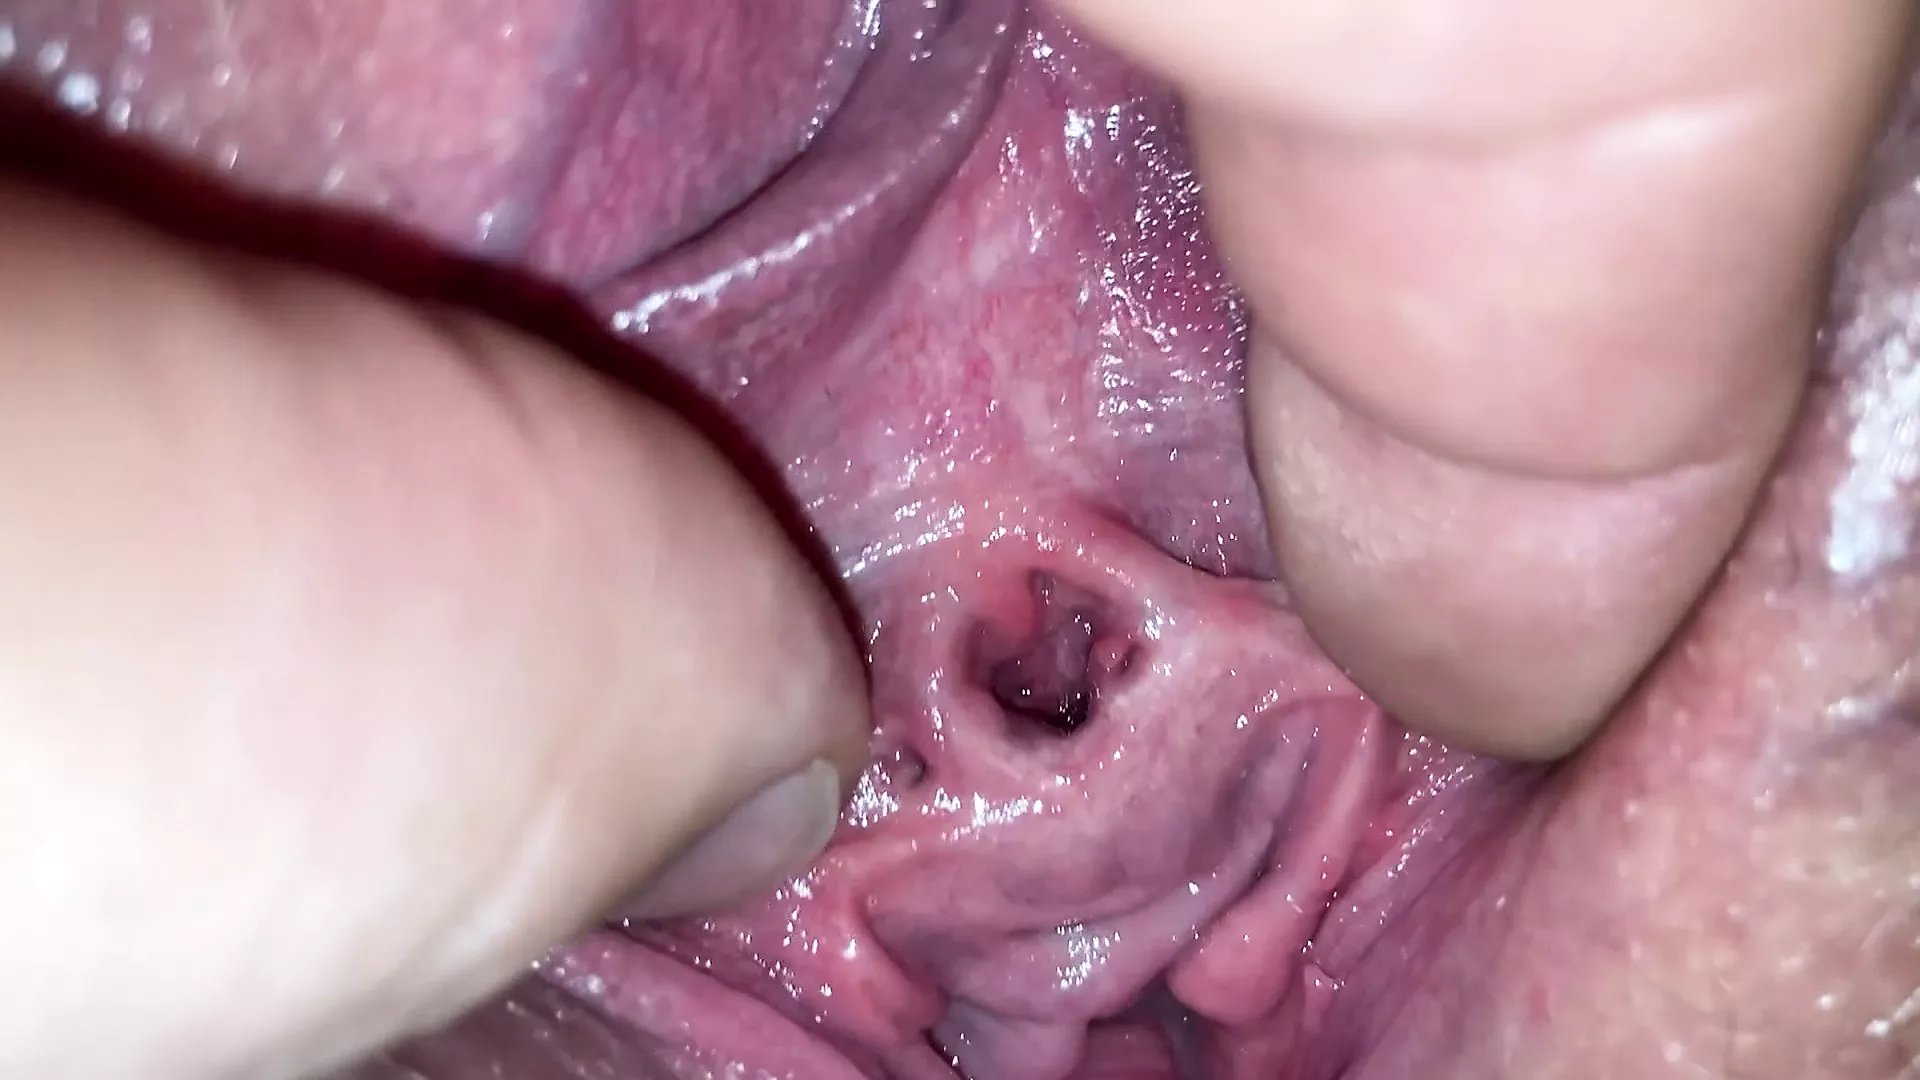 Exposed close up pov BBW open peehole fingering. BBW ass worship. Borr and Sirens Delight Sex Image Hq